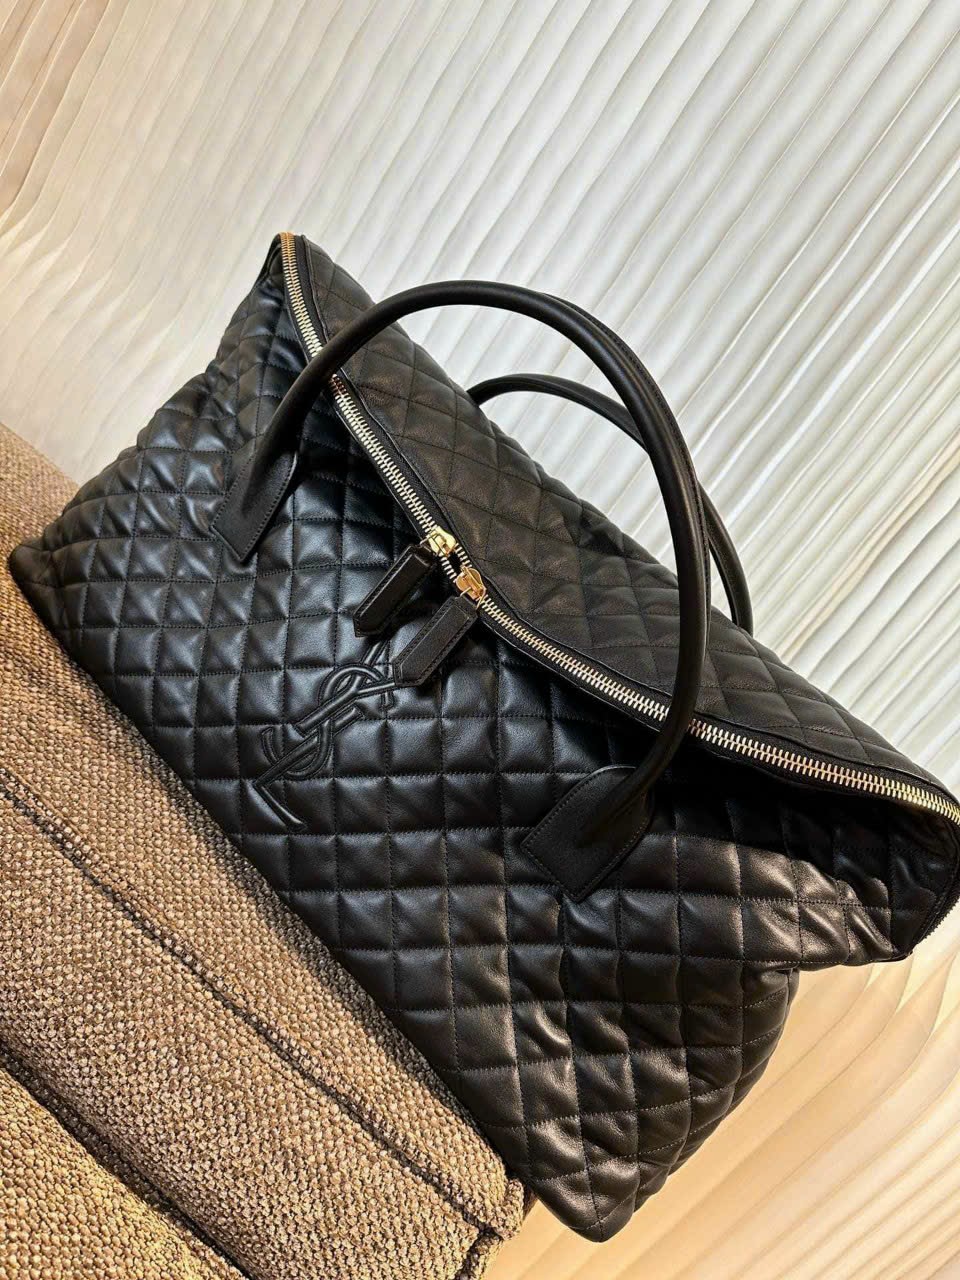 TÚI DU LỊCH YSL ES GIANT TRAVEL BAG IN QUILTED LEATHER 2